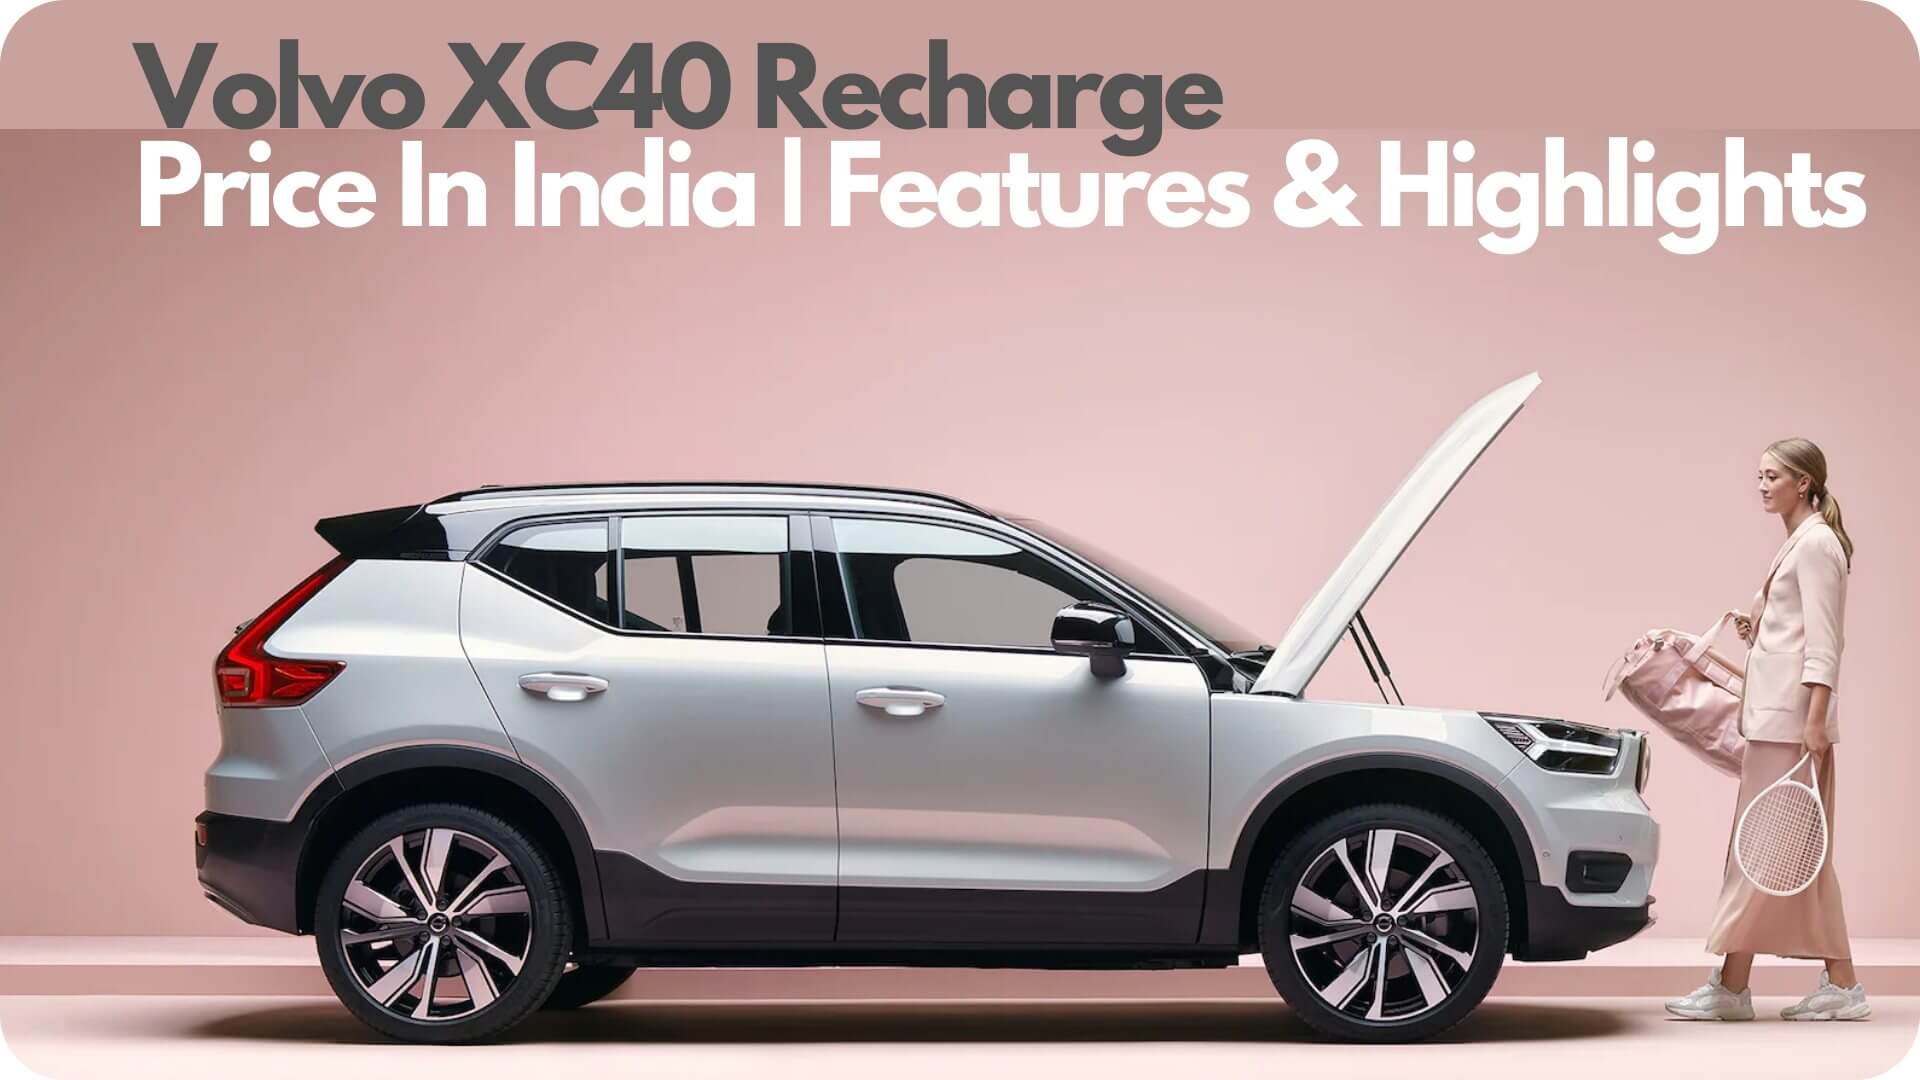 https://e-vehicleinfo.com/volvo-xc40-recharge-price-in-india-features-highlights/